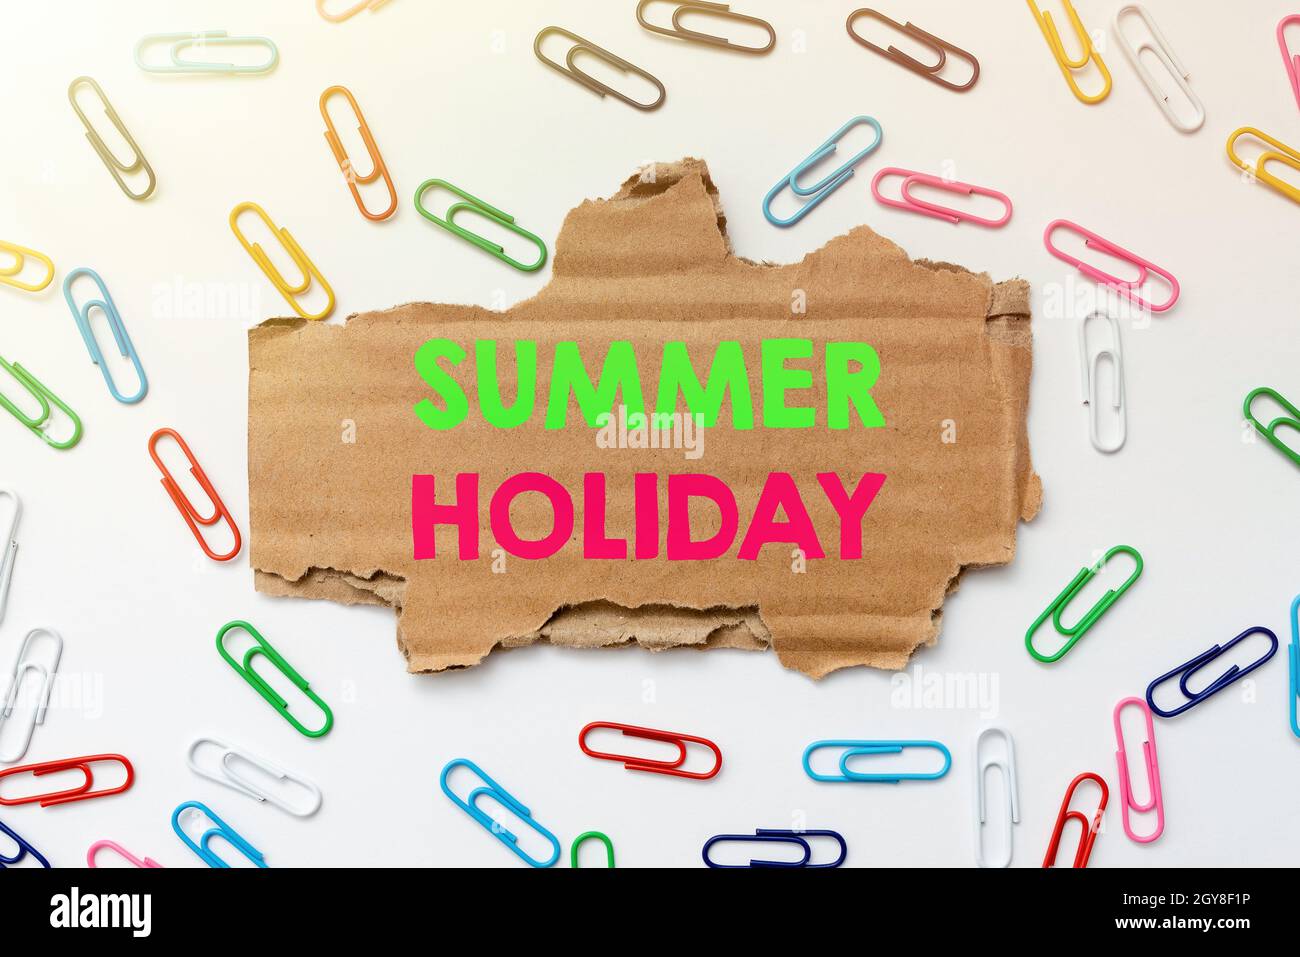 Text caption presenting Summer Holiday, Business overview special period of time in summer for relaxation and fun Creative Home Recycling Ideas And De Stock Photo